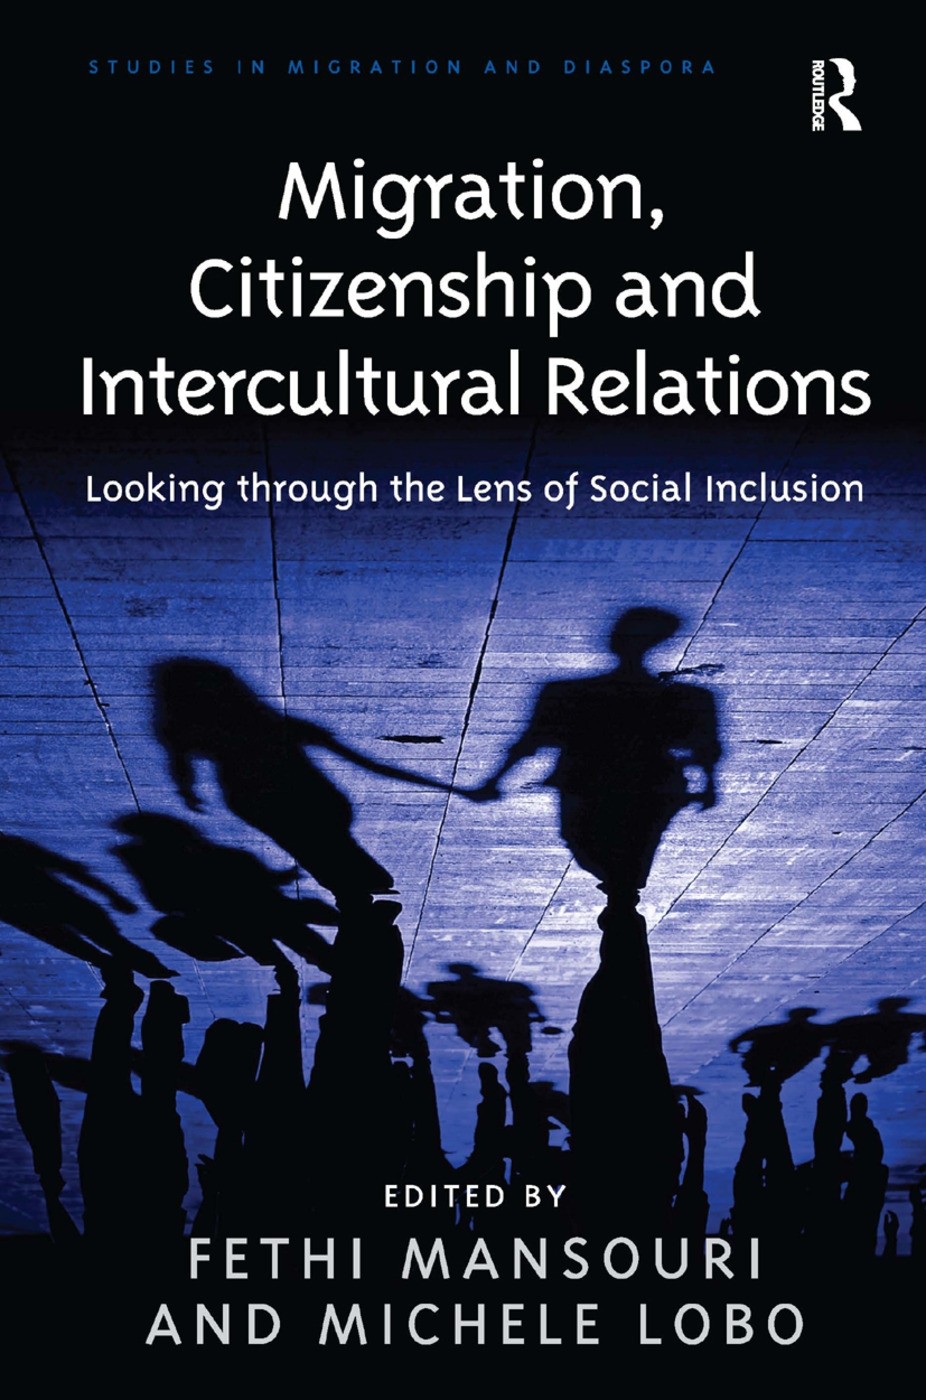 Migration, Citizenship and Intercultural Relations: Looking Through the Lens of Social Inclusion